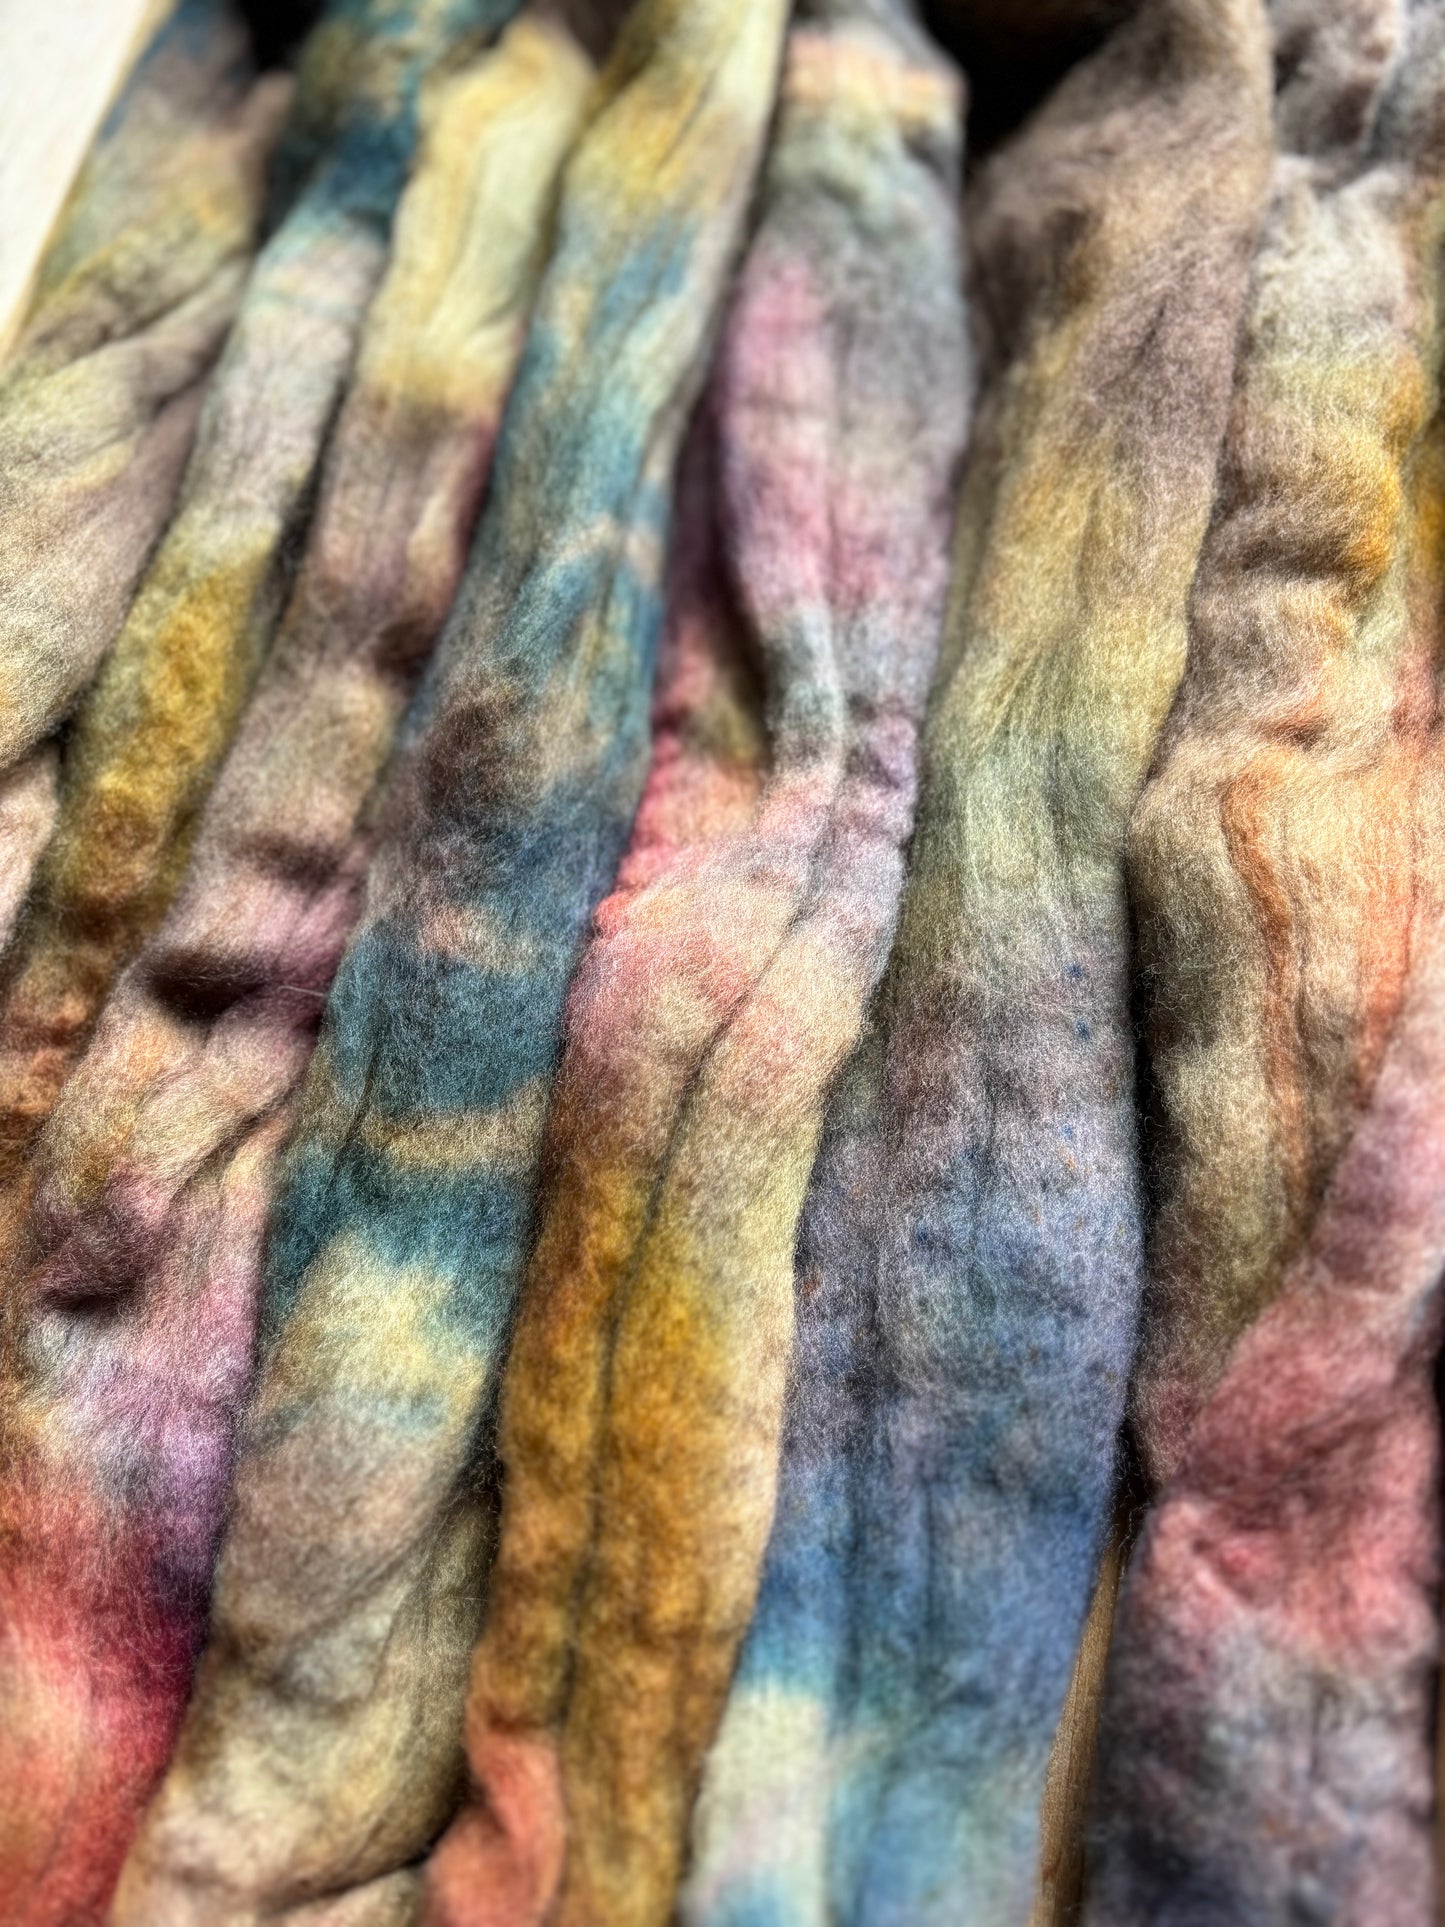 100 grams of Spinning Fibre - Untreated Merino Wool 22 Micron - Hand Dyed Combed Top